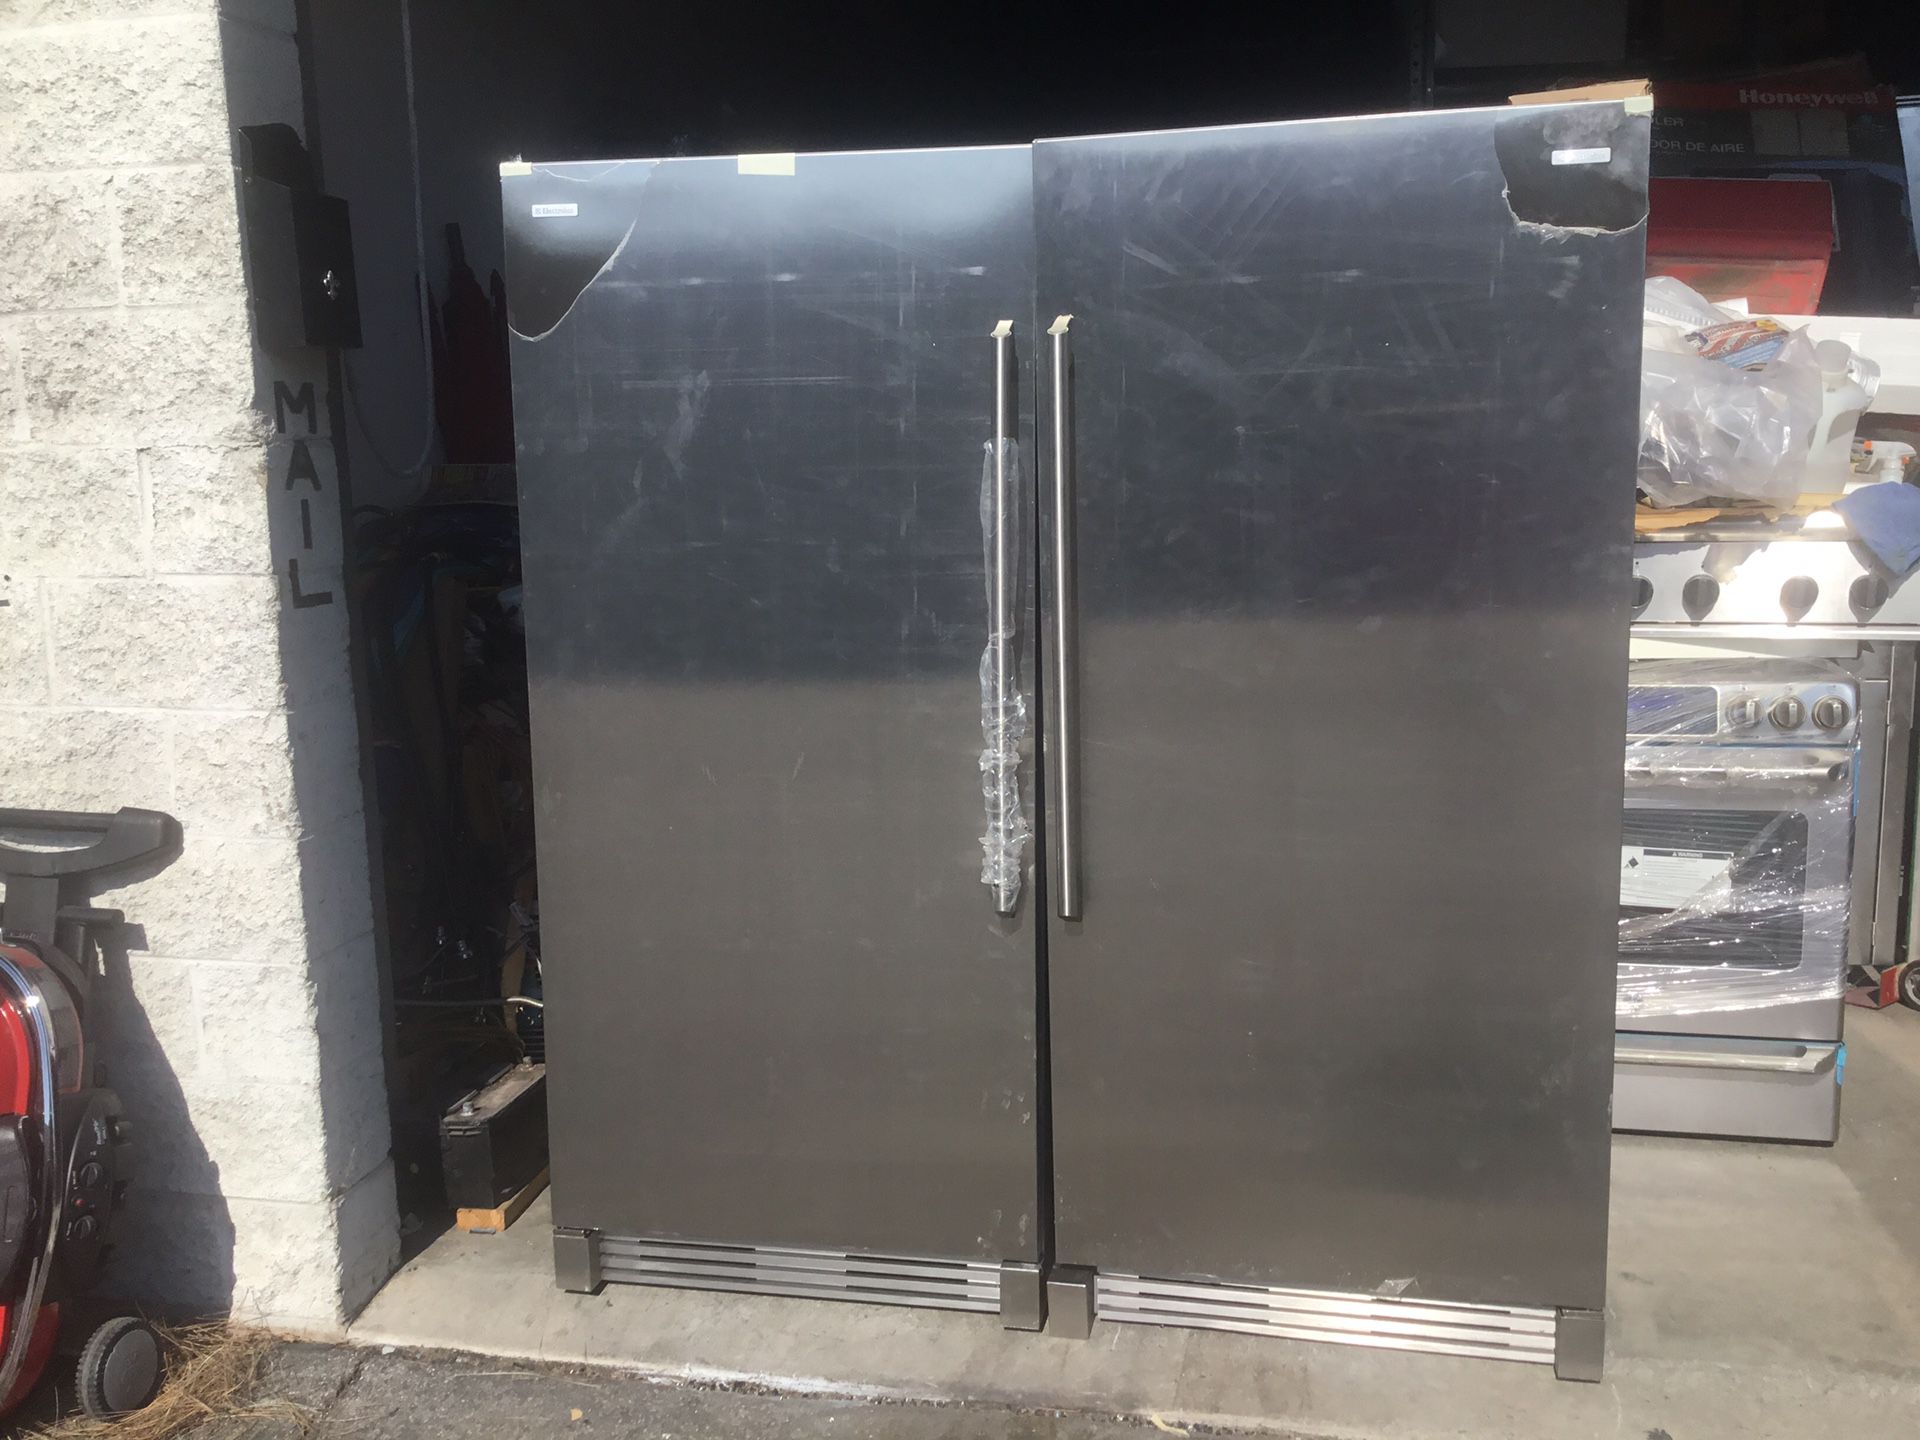 New up right freezer and refrigerator Electrolux stainless steel w 64”